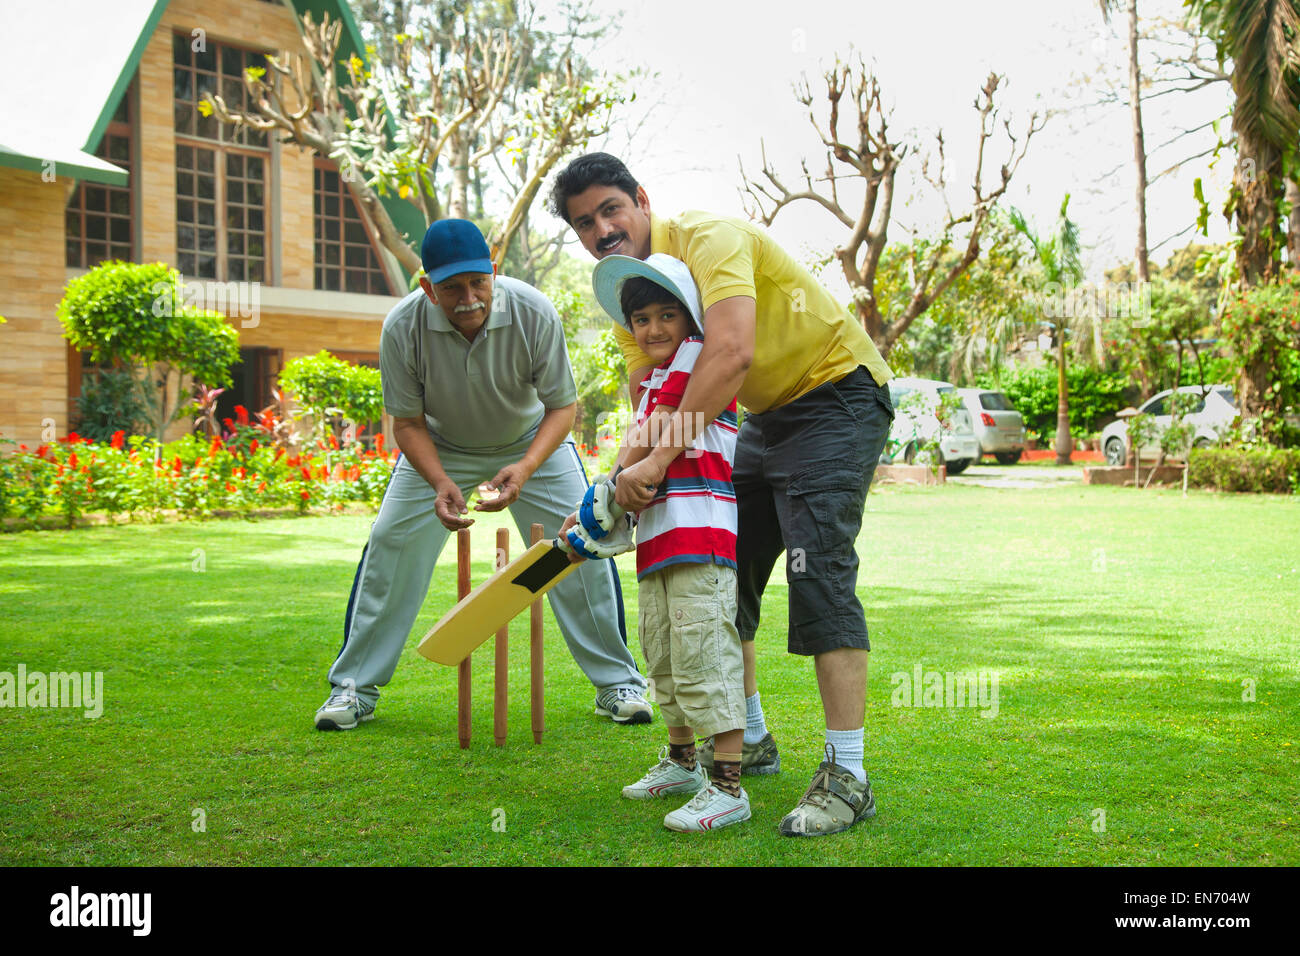 Young boy playing cricket with father and grandfather Stock Photo